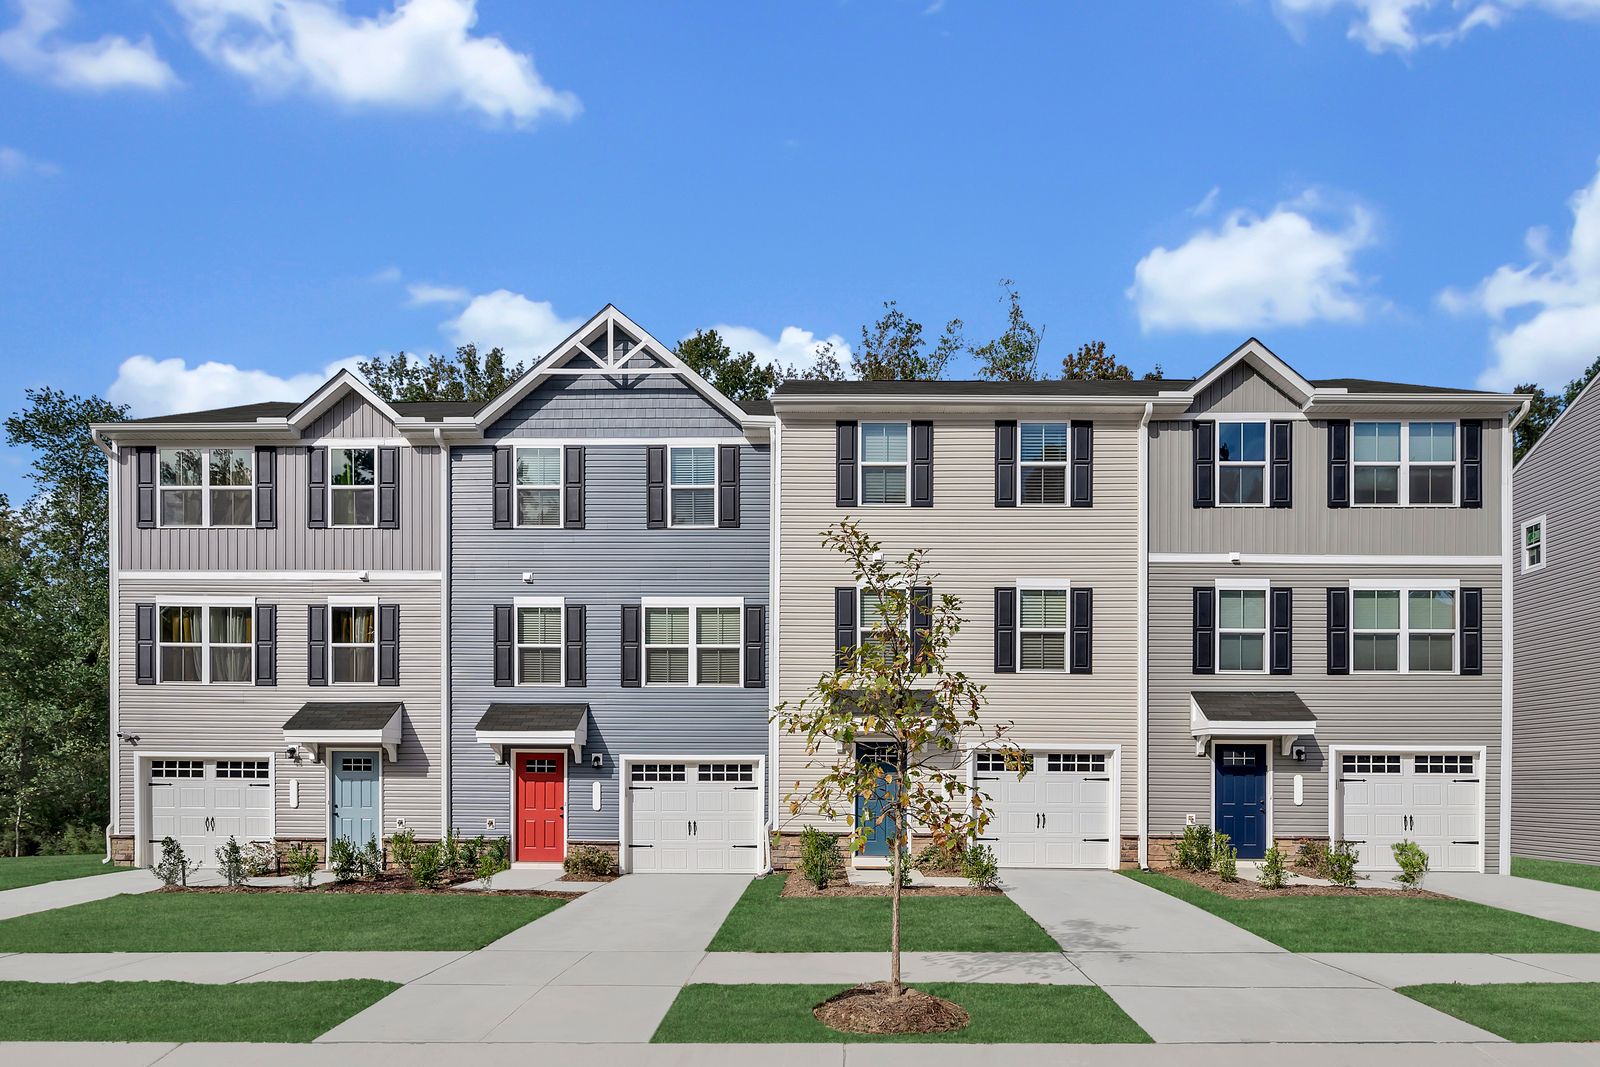 THE BEST VALUE TOWNHOMES IN ZEBULON - FROM THE $260s